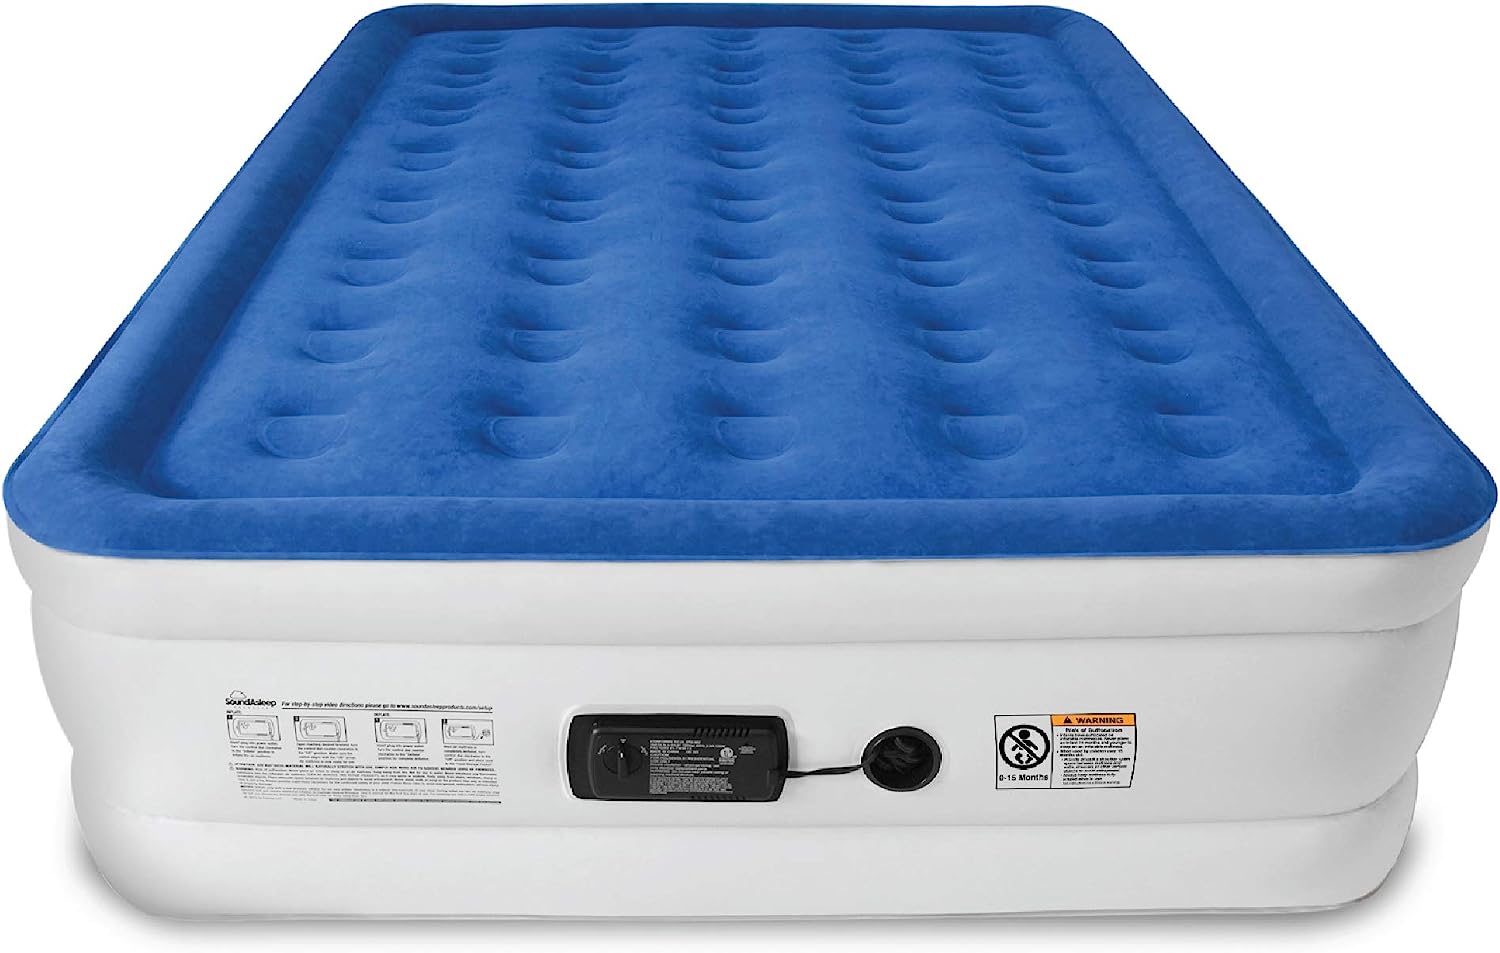 SoundAsleep Dream Series Luxury Air Mattress with ComfortCoil Technology & Built-in High Capacity Pump for Home & Camping- Double Height, Adjustable, Inflatable Blow Up, Portable – Queen Size